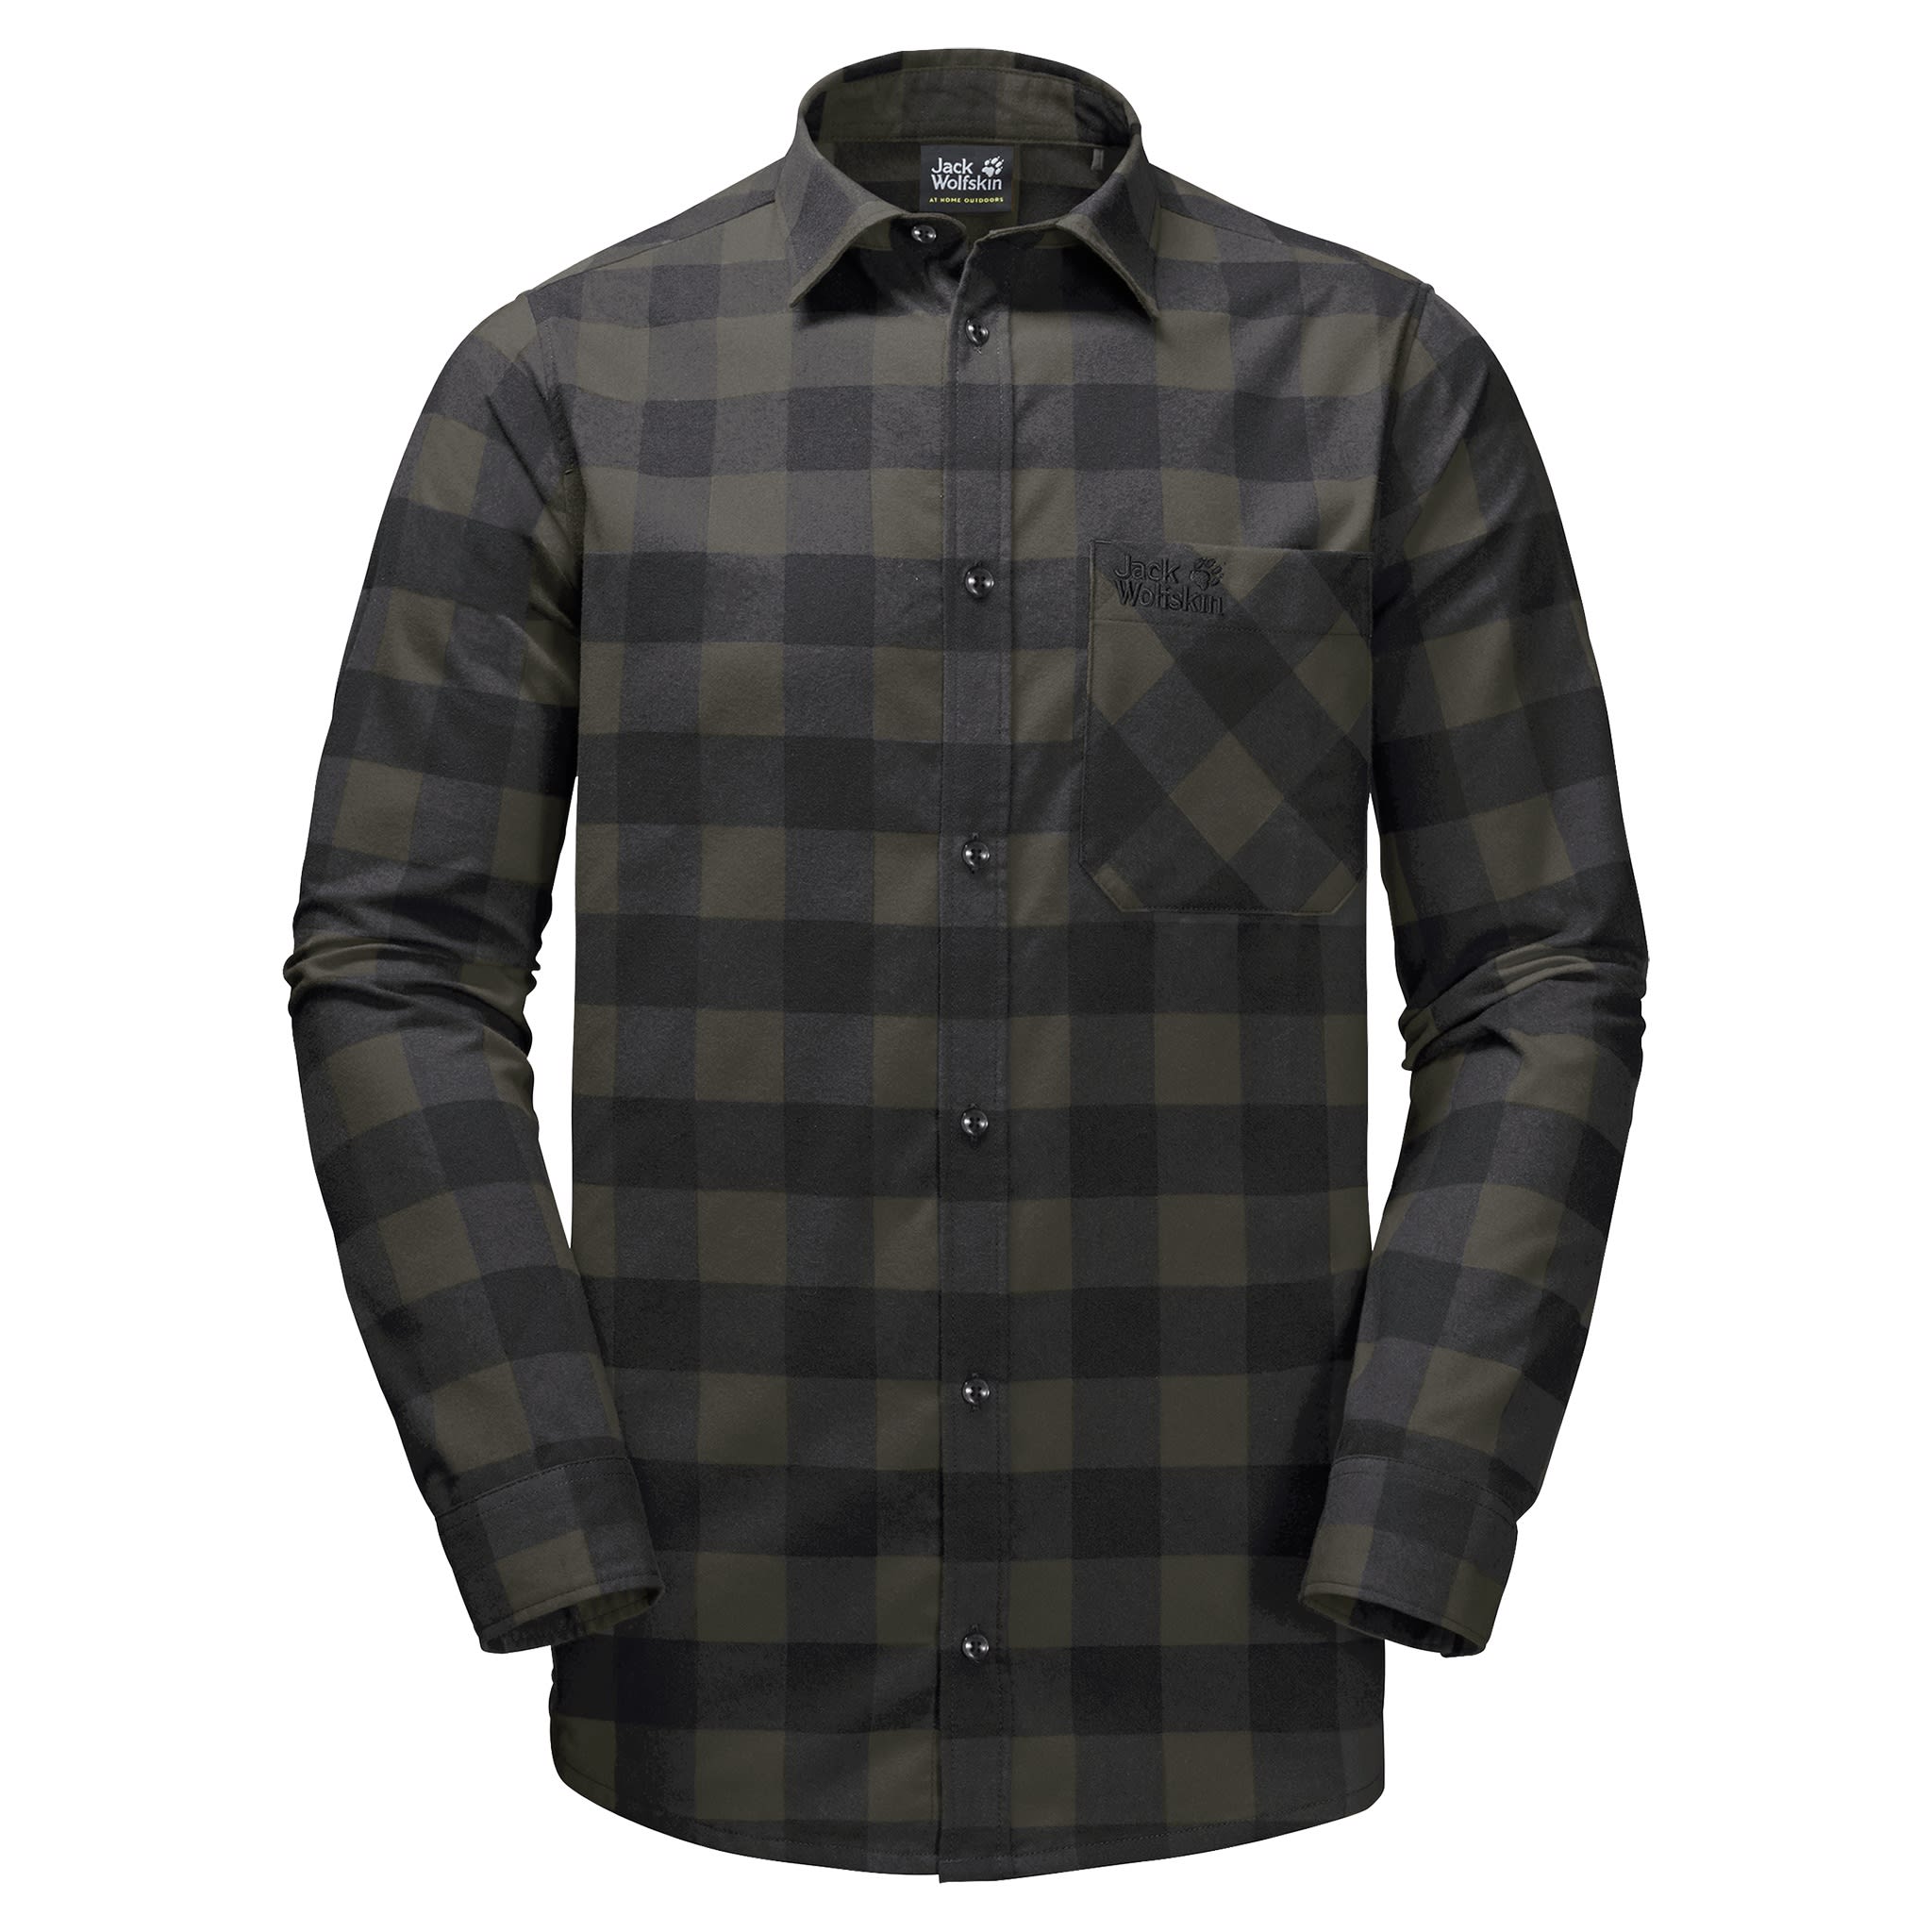 Buy Jack Wolfskin Men's Red River Shirt from Outnorth